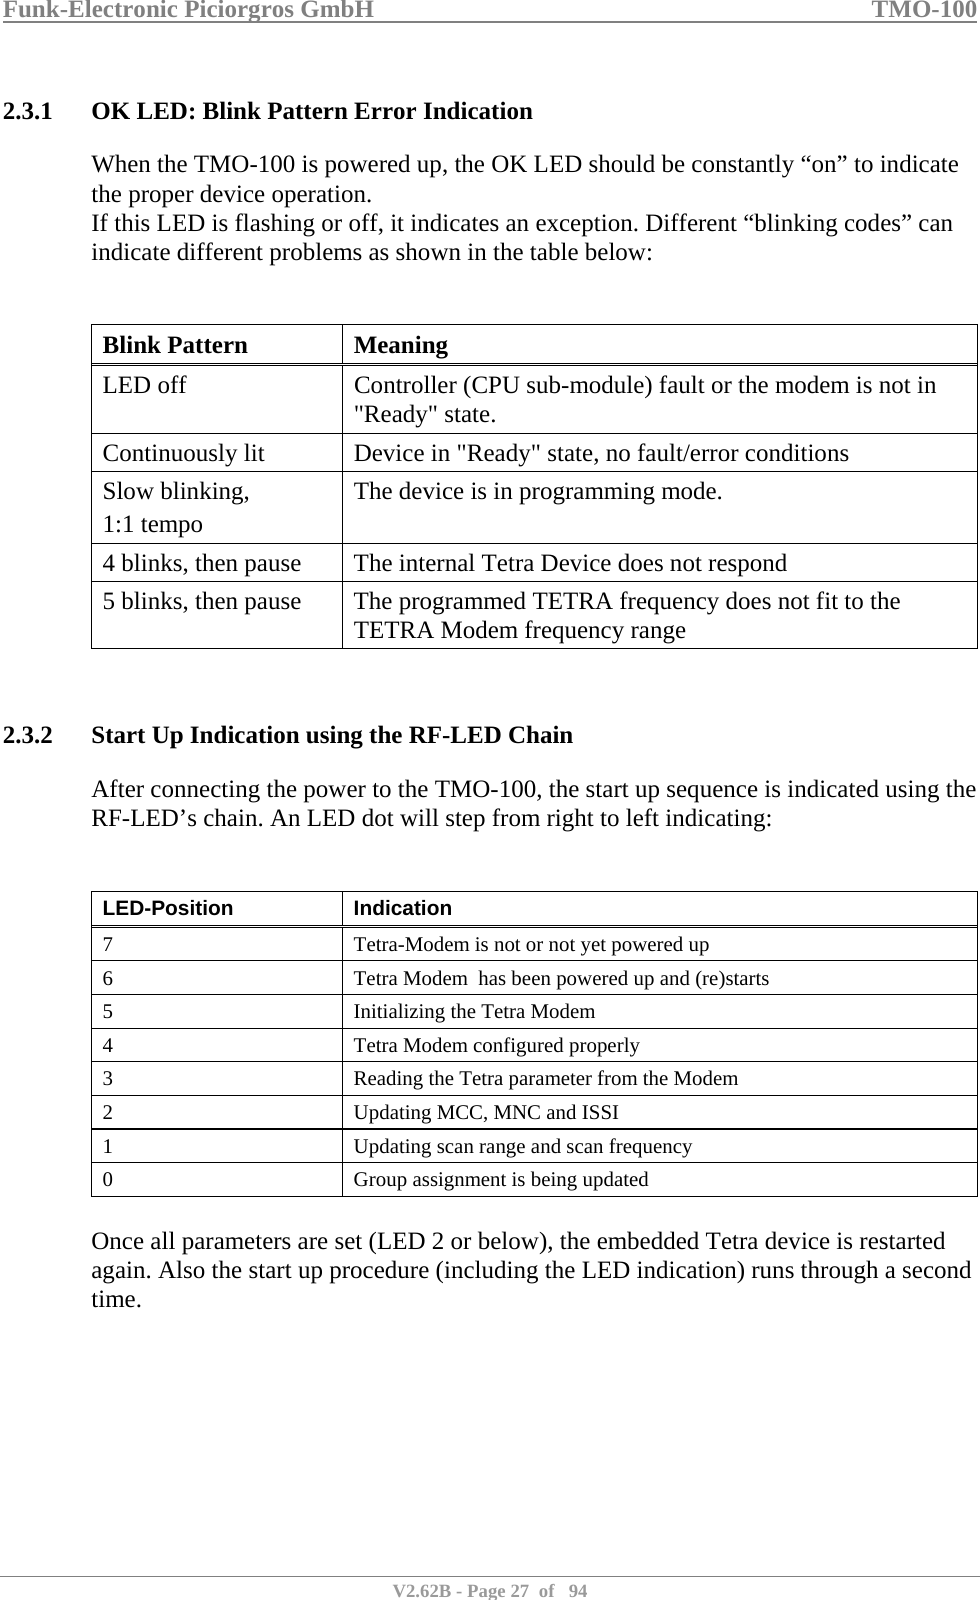 Funk-Electronic Piciorgros GmbH   TMO-100   V2.62B - Page 27  of   94   2.3.1 OK LED: Blink Pattern Error Indication When the TMO-100 is powered up, the OK LED should be constantly “on” to indicate the proper device operation. If this LED is flashing or off, it indicates an exception. Different “blinking codes” can indicate different problems as shown in the table below:   Blink Pattern Meaning LED off  Controller (CPU sub-module) fault or the modem is not in &quot;Ready&quot; state.  Continuously lit  Device in &quot;Ready&quot; state, no fault/error conditions Slow blinking,  1:1 tempo The device is in programming mode. 4 blinks, then pause  The internal Tetra Device does not respond 5 blinks, then pause  The programmed TETRA frequency does not fit to the TETRA Modem frequency range    2.3.2 Start Up Indication using the RF-LED Chain After connecting the power to the TMO-100, the start up sequence is indicated using the RF-LED’s chain. An LED dot will step from right to left indicating:   LED-Position Indication 7  Tetra-Modem is not or not yet powered up 6  Tetra Modem  has been powered up and (re)starts 5  Initializing the Tetra Modem 4  Tetra Modem configured properly 3  Reading the Tetra parameter from the Modem 2  Updating MCC, MNC and ISSI 1  Updating scan range and scan frequency 0  Group assignment is being updated  Once all parameters are set (LED 2 or below), the embedded Tetra device is restarted again. Also the start up procedure (including the LED indication) runs through a second time. 